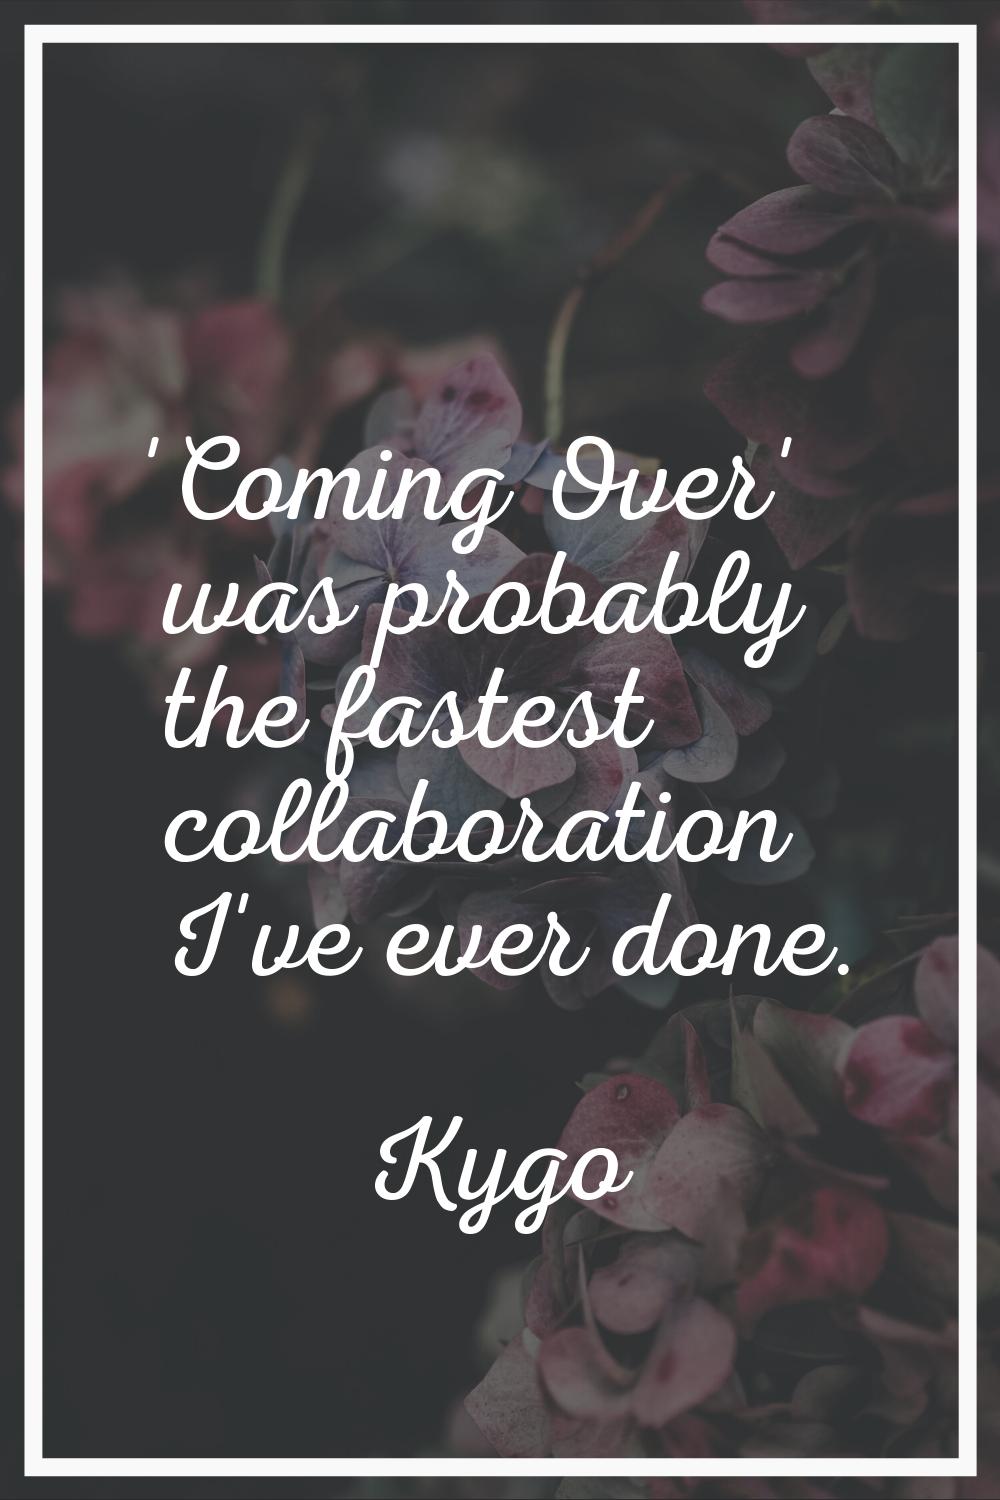 'Coming Over' was probably the fastest collaboration I've ever done.